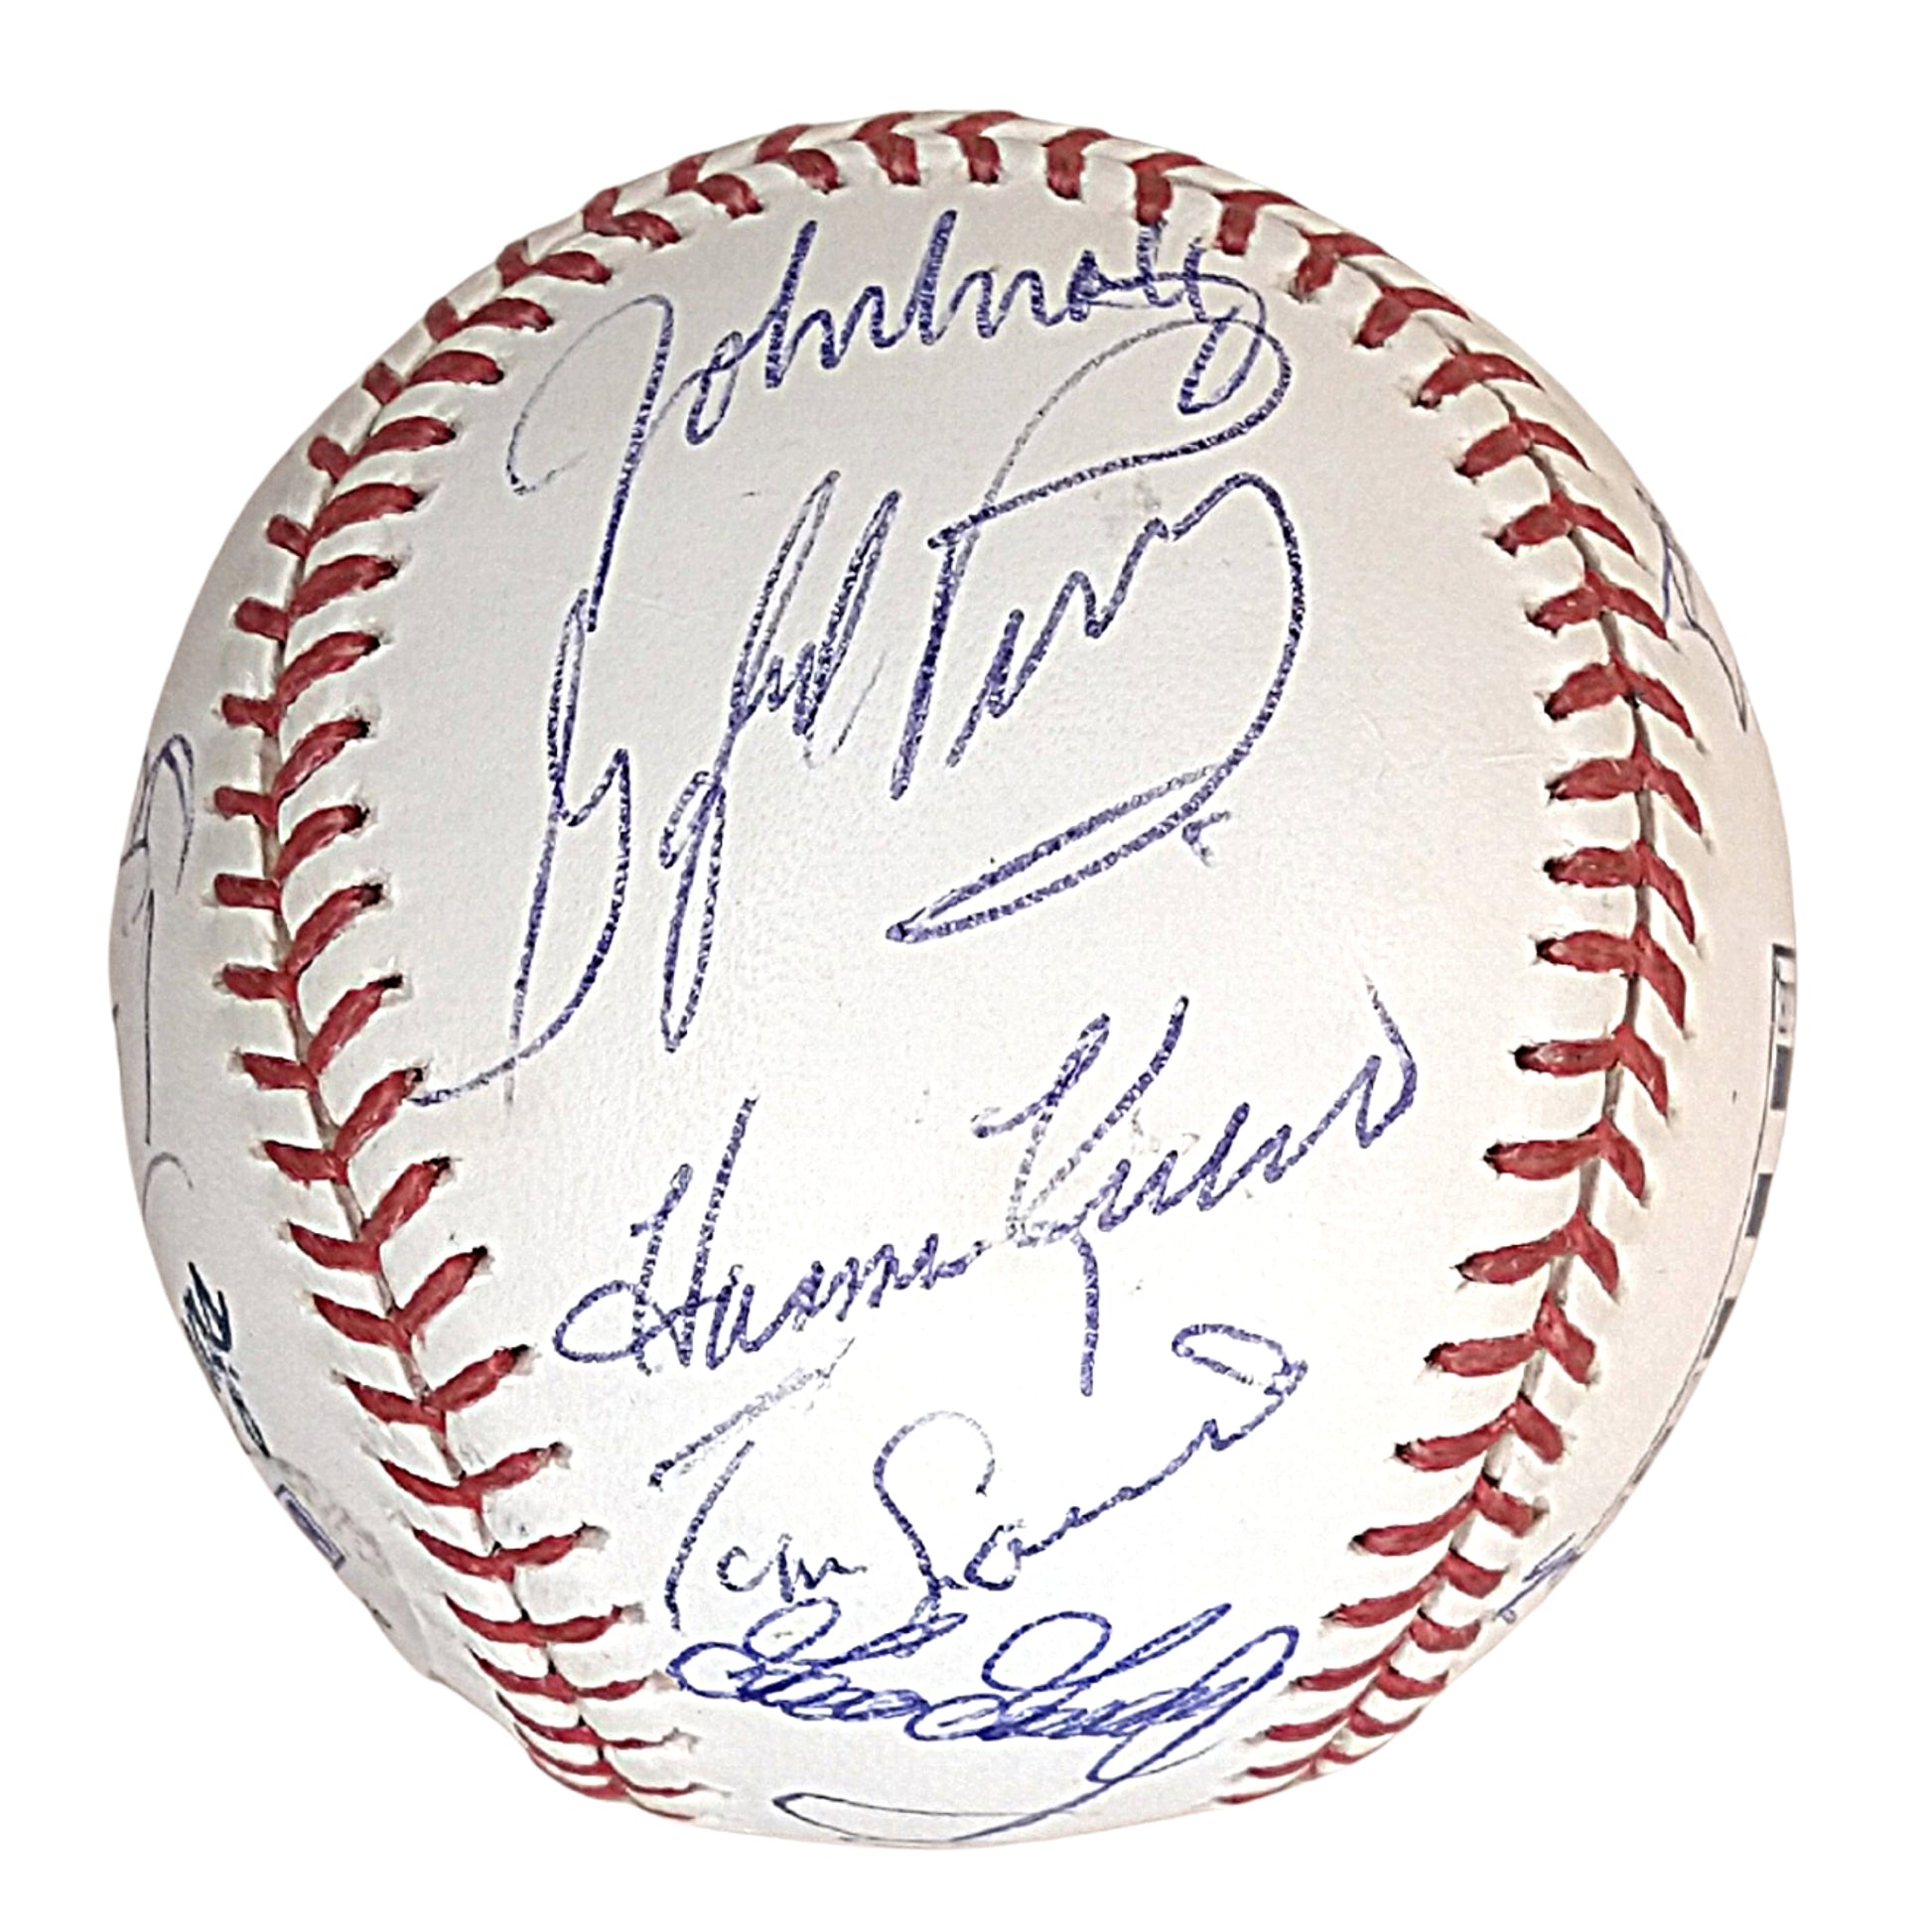 The St. Louis Cardinals - Autographed Signed Baseball With Co-Signers